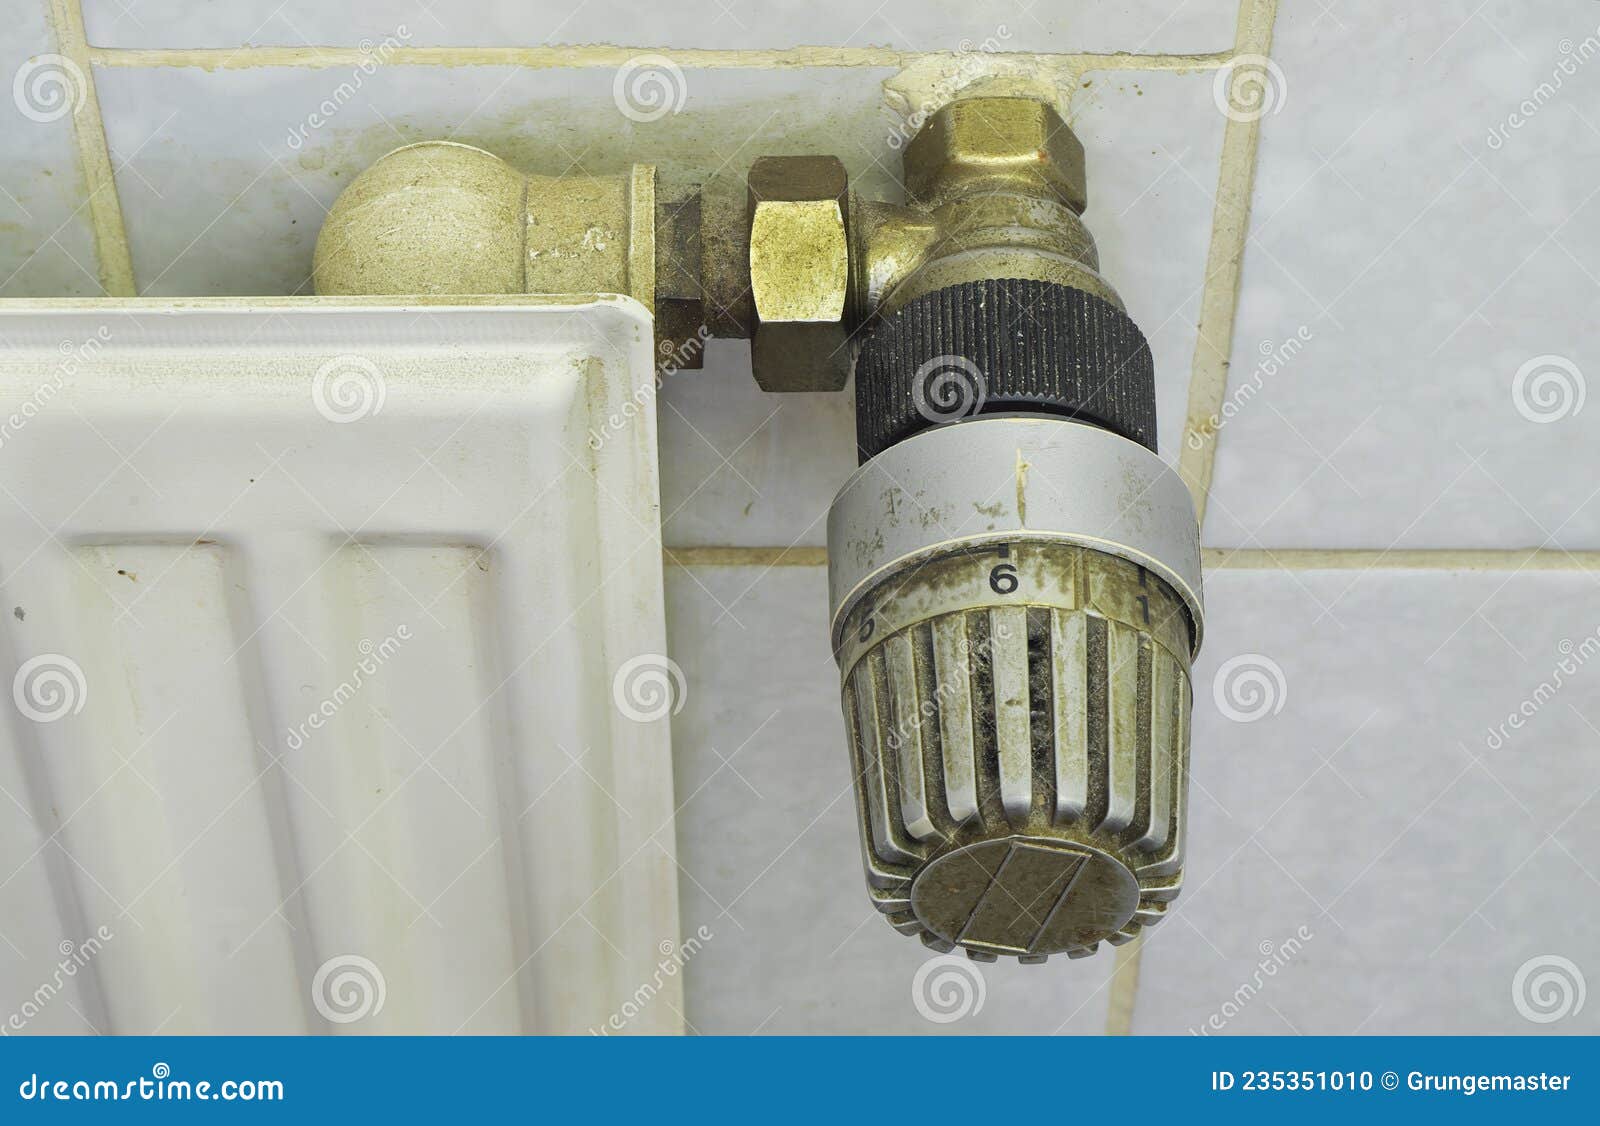 outdated  old and dirty radiator valve, renewal of the heating  and co2 savings concept,copy space